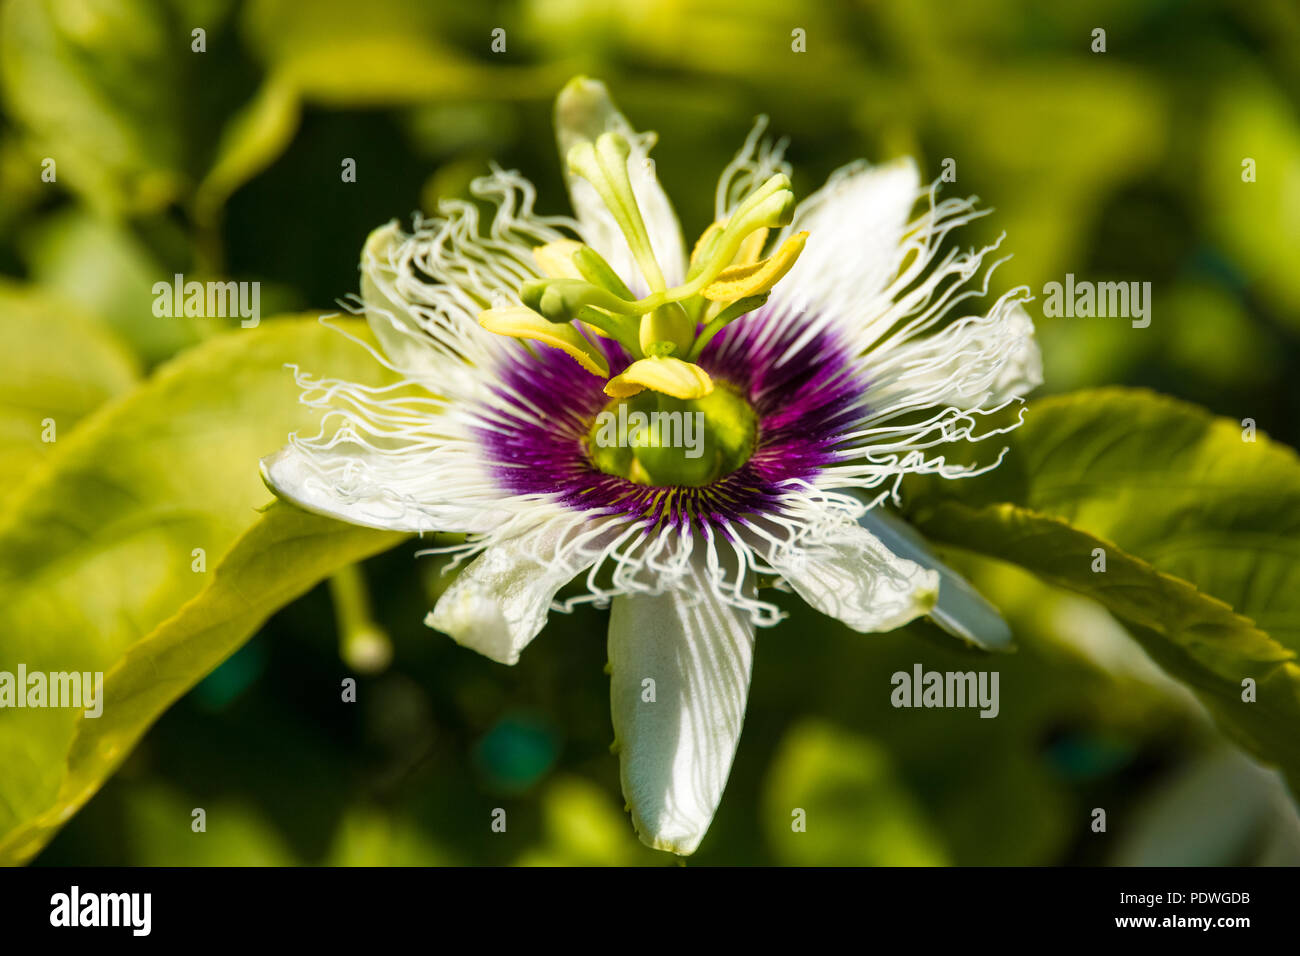 Nice close up shot of a beautiful white purple passion flower (Passiflora edulis) taken in Malaysia. It is cultivated commercially in tropical and... Stock Photo